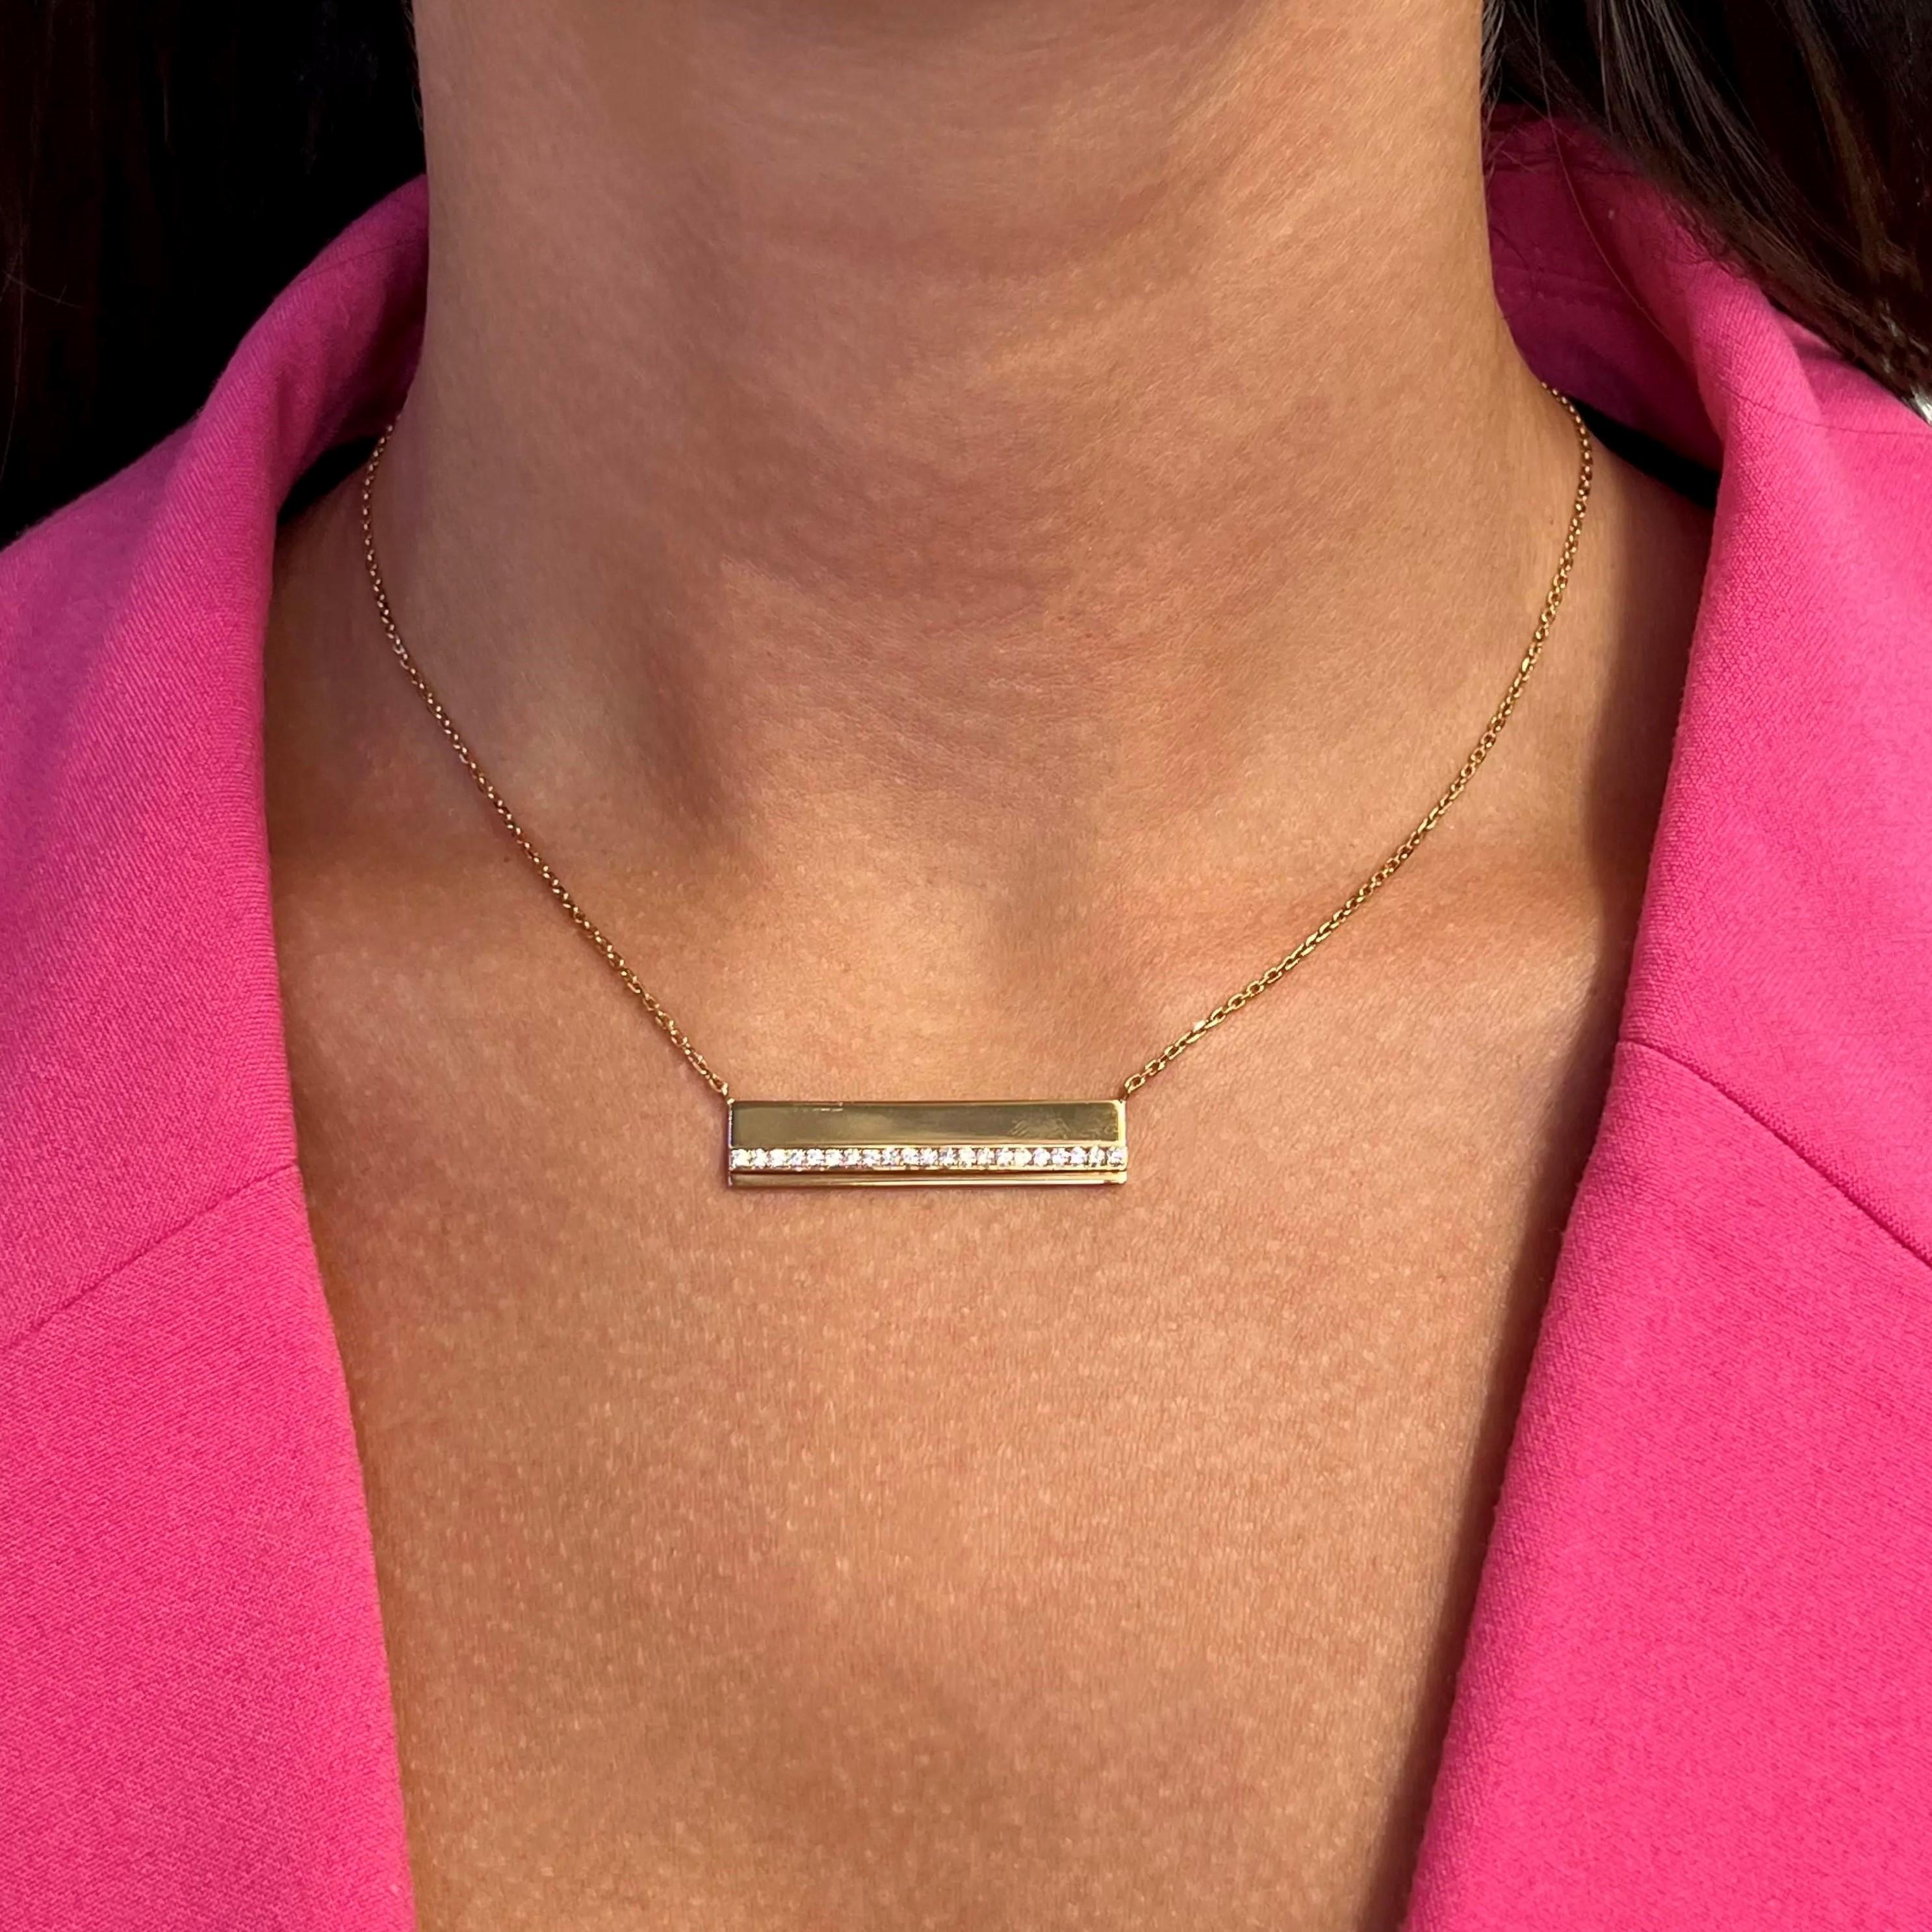 Messika 0.36Cttw Kate Diamond Bar Pendant Chain Necklace 18K Rose Gold 17 Inches Neuf - En vente à New York, NY